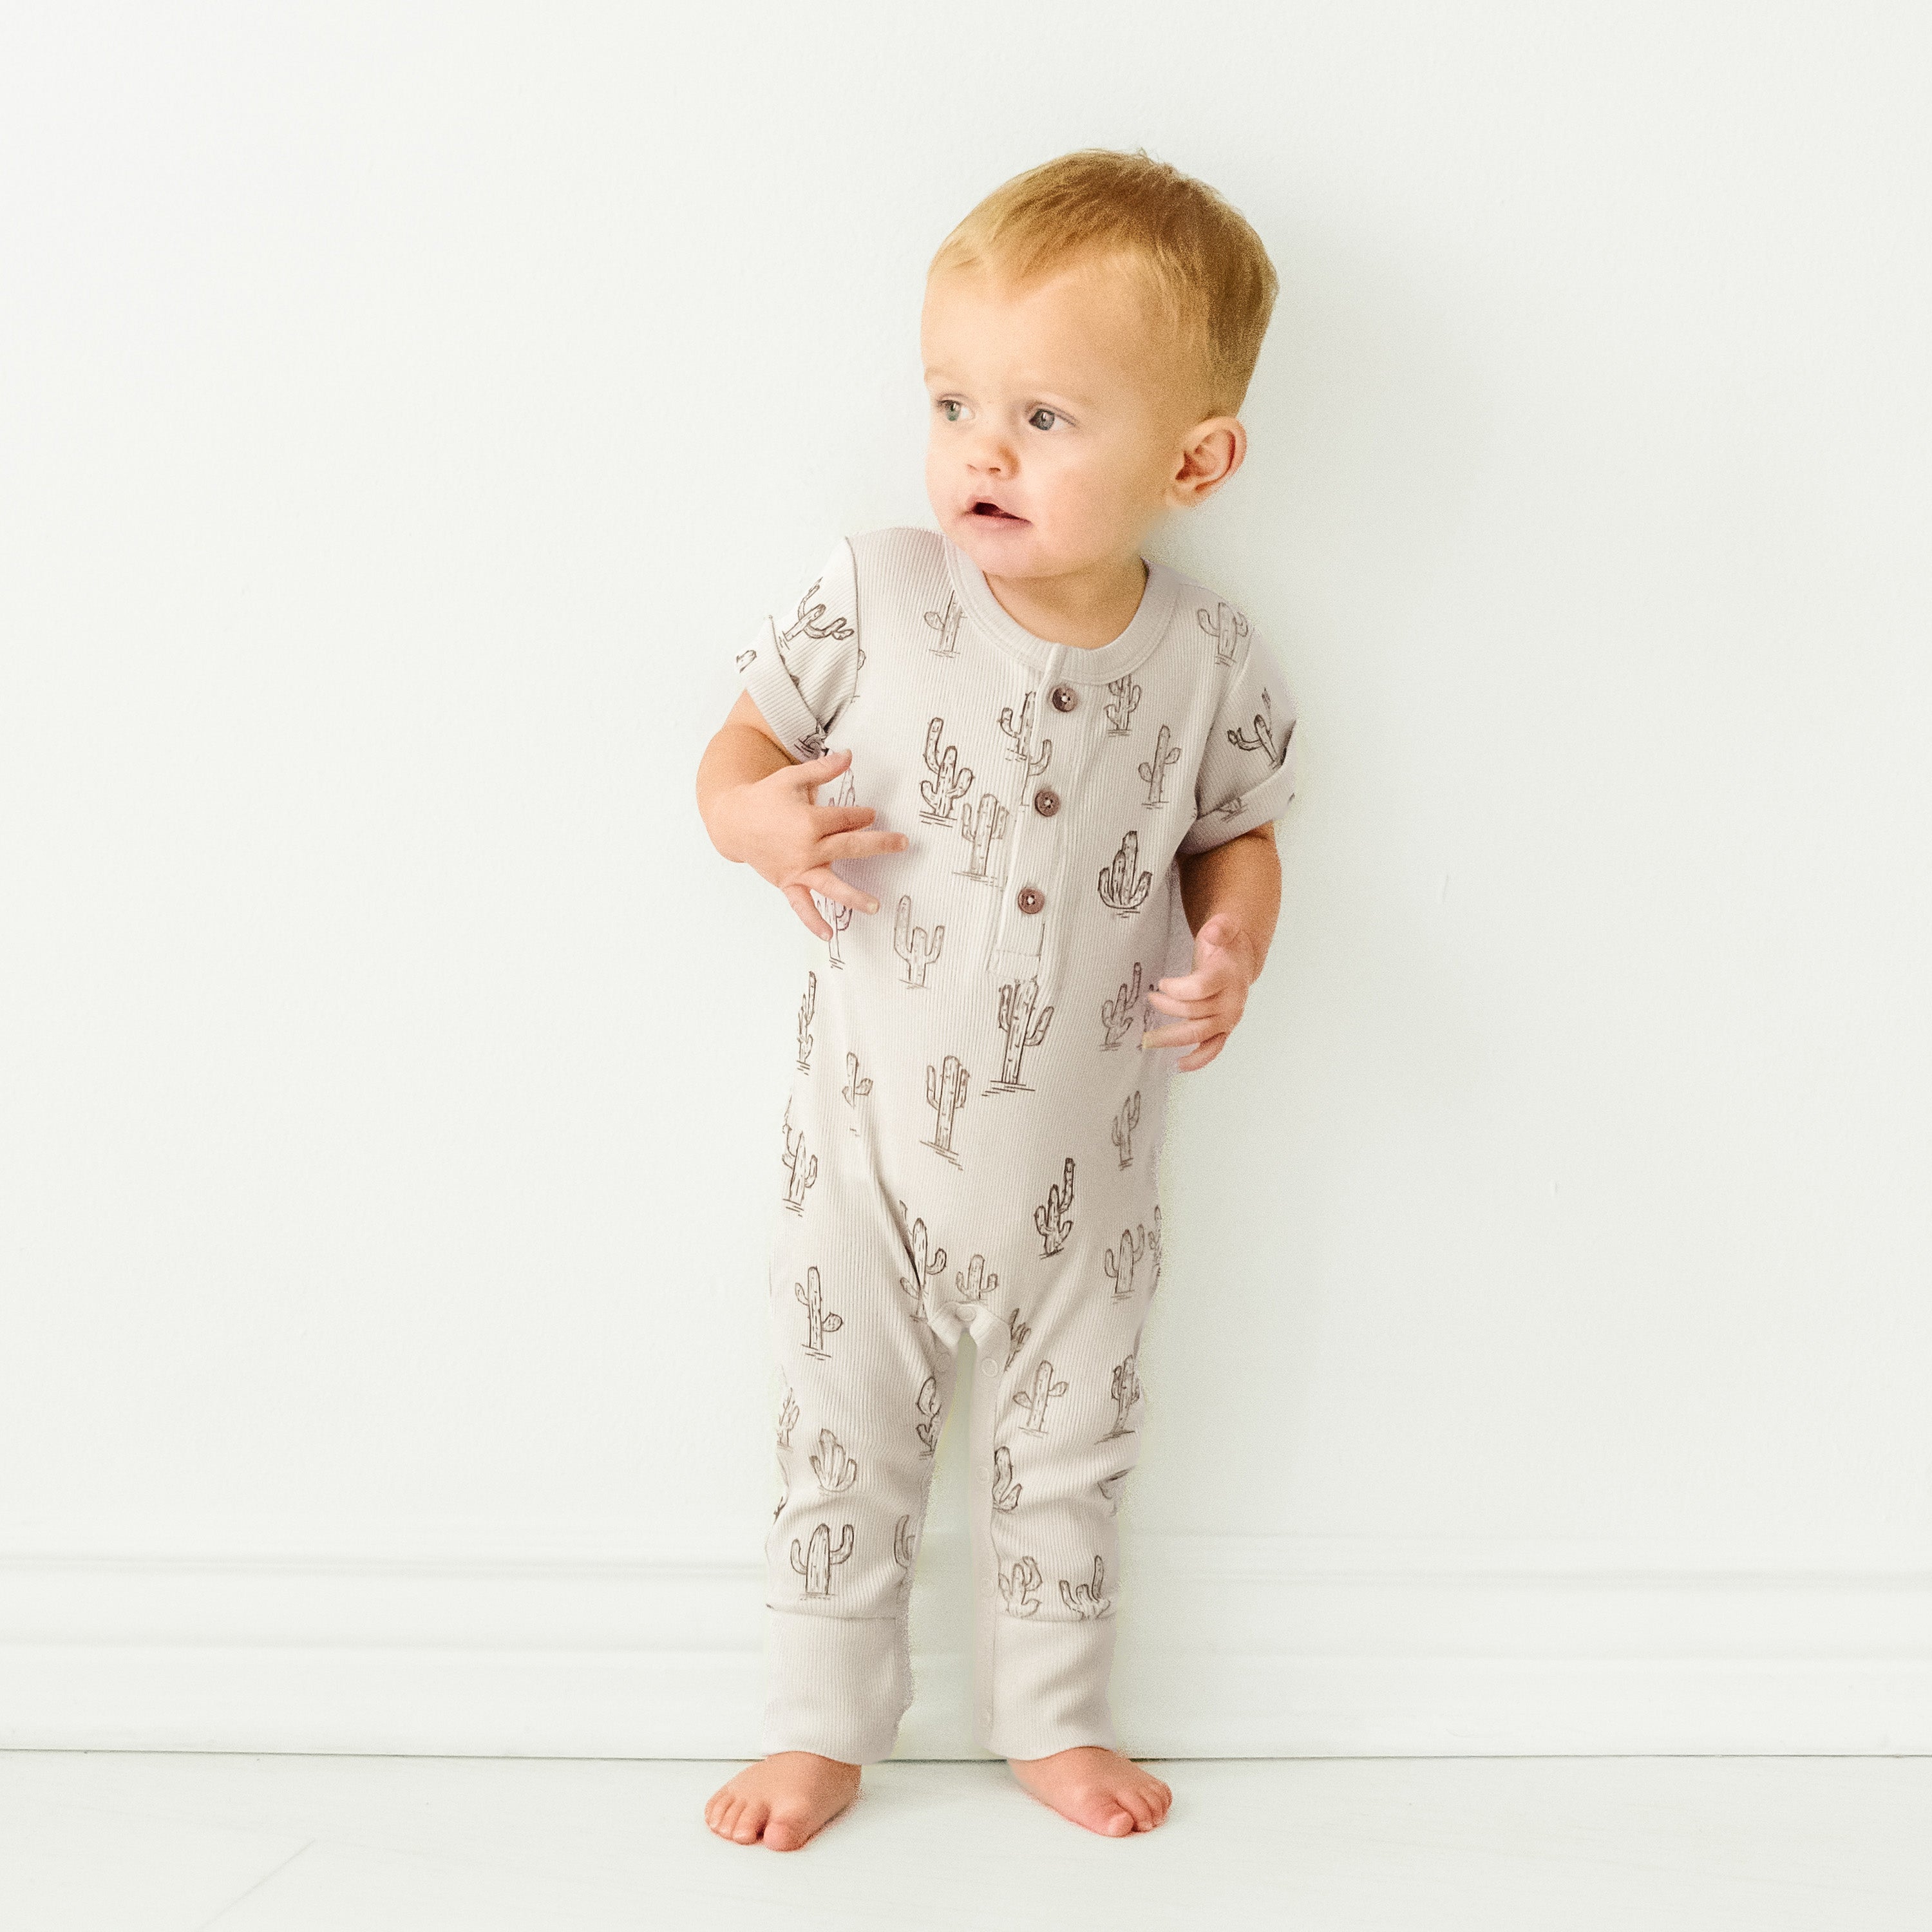 A baby with blond hair stands against a white wall, wearing a Makemake Organics Organic Short Sleeve Button Romper - Cactus, looking slightly to the side.